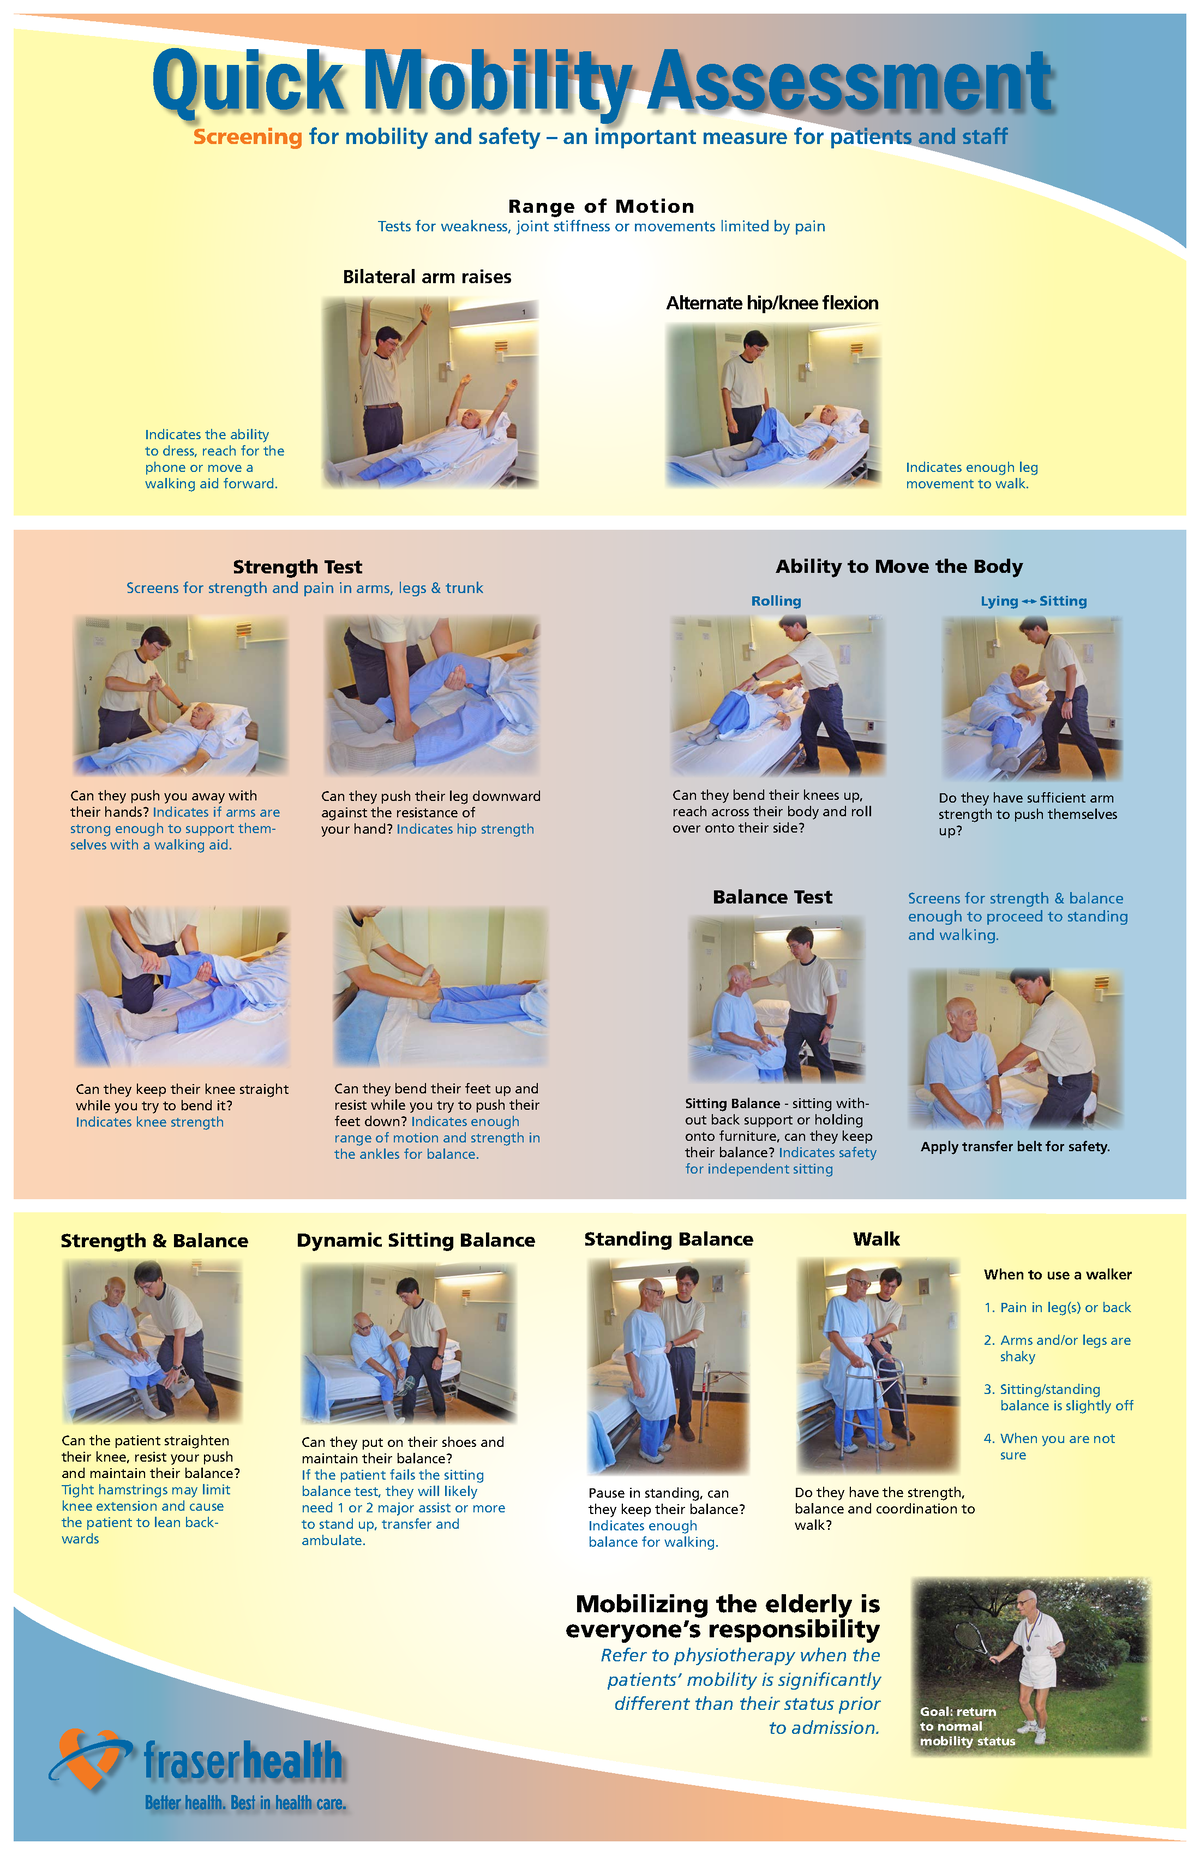 S 2 - Quick Mobility Assessment - Quick Mobility Assessment Screening ...